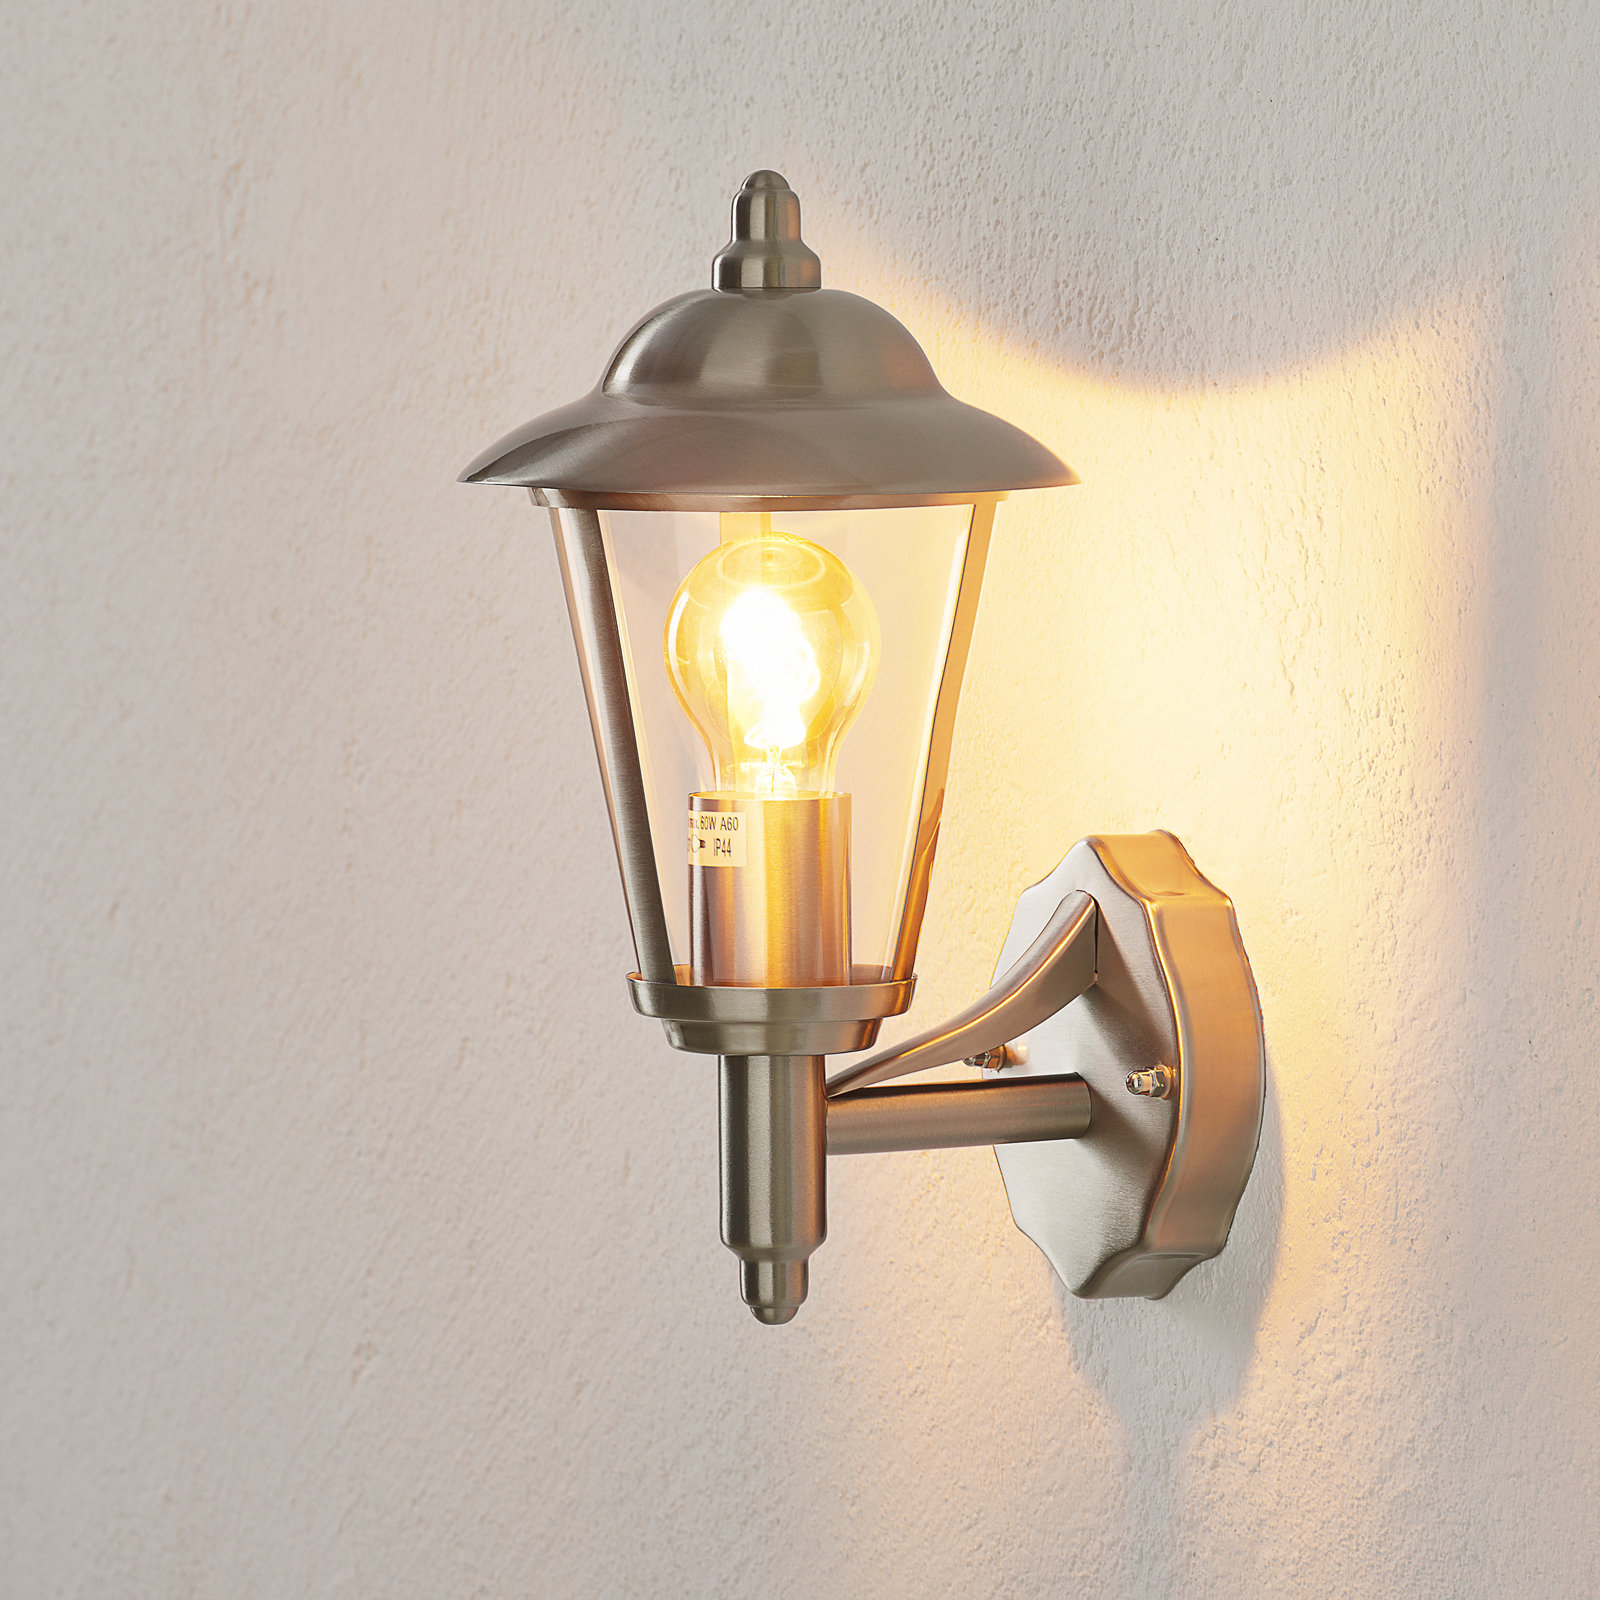 Attractive outdoor wall light Neil I